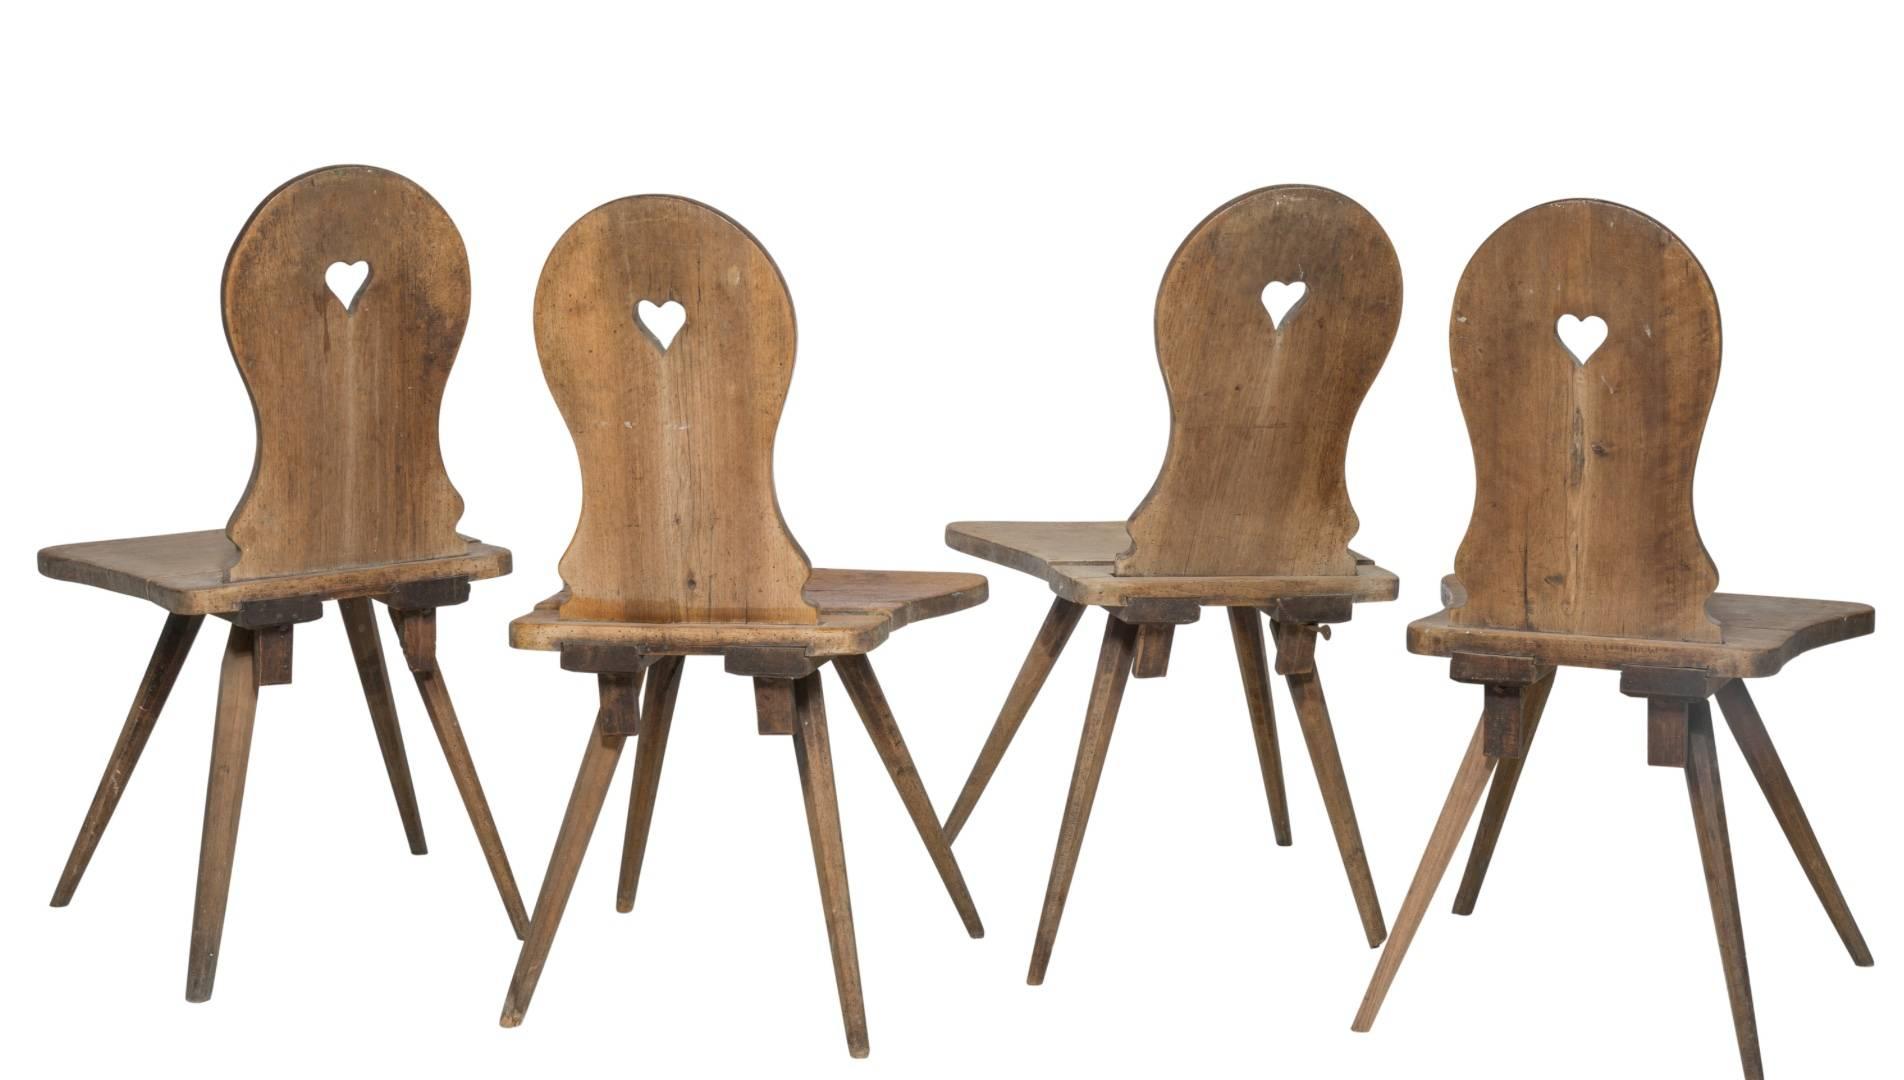 Set of Four Swiss German or Austrian oak country board chairs perfect for the kitchen. Tyrolean Alpine Rustic design. 

Dimensions:
Height: 35 inches
Width: 19 inches 
Depth: 14.5 inches 
(88.9 x 48.3 x 36.5 cm)

Provenance: The Ritter Antik